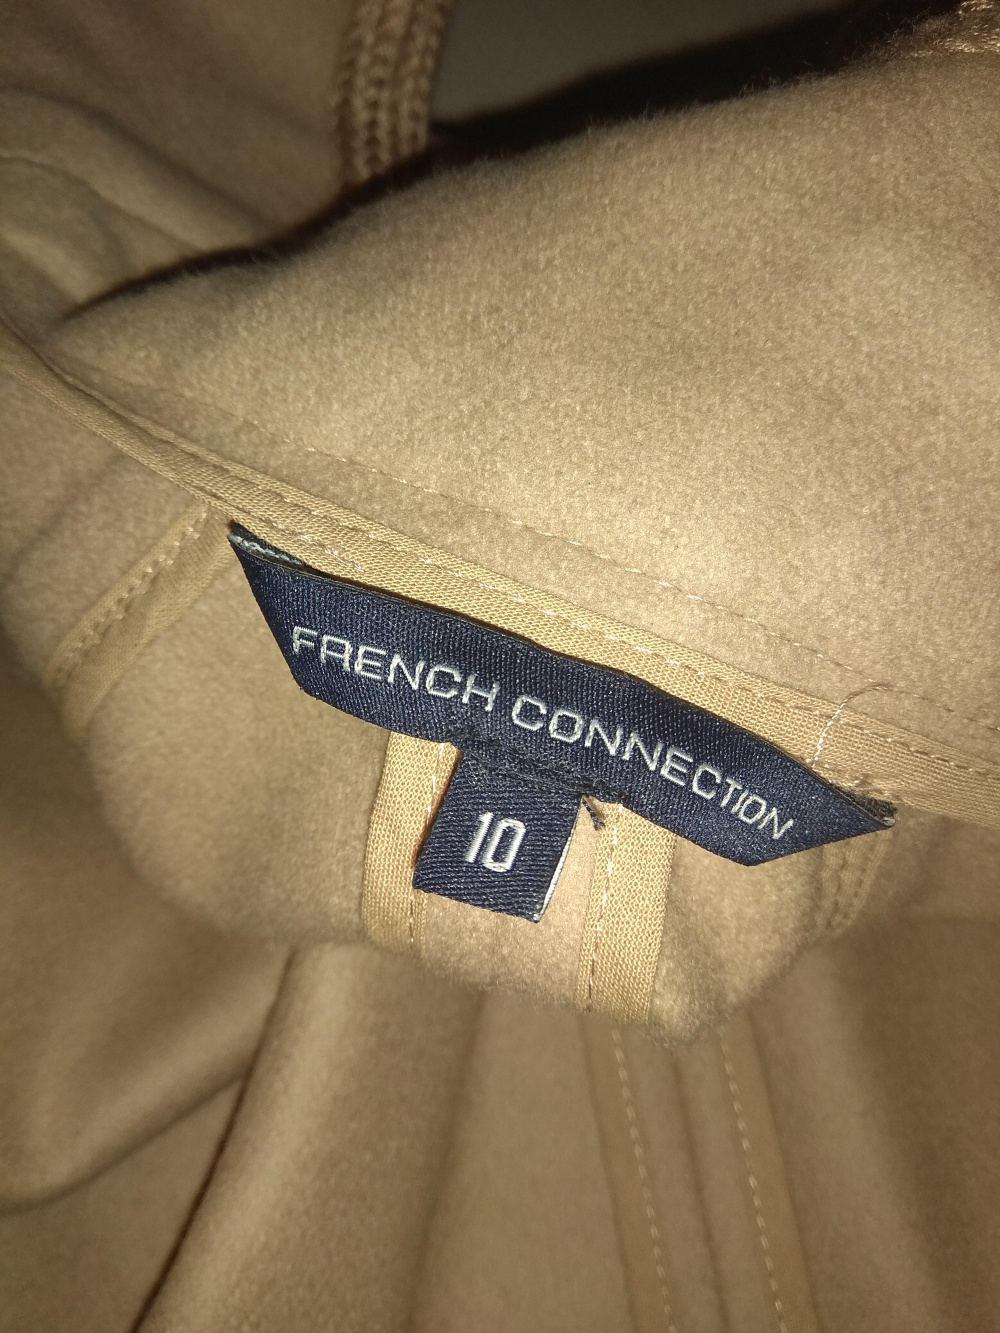 Кейп French Connection, uk10